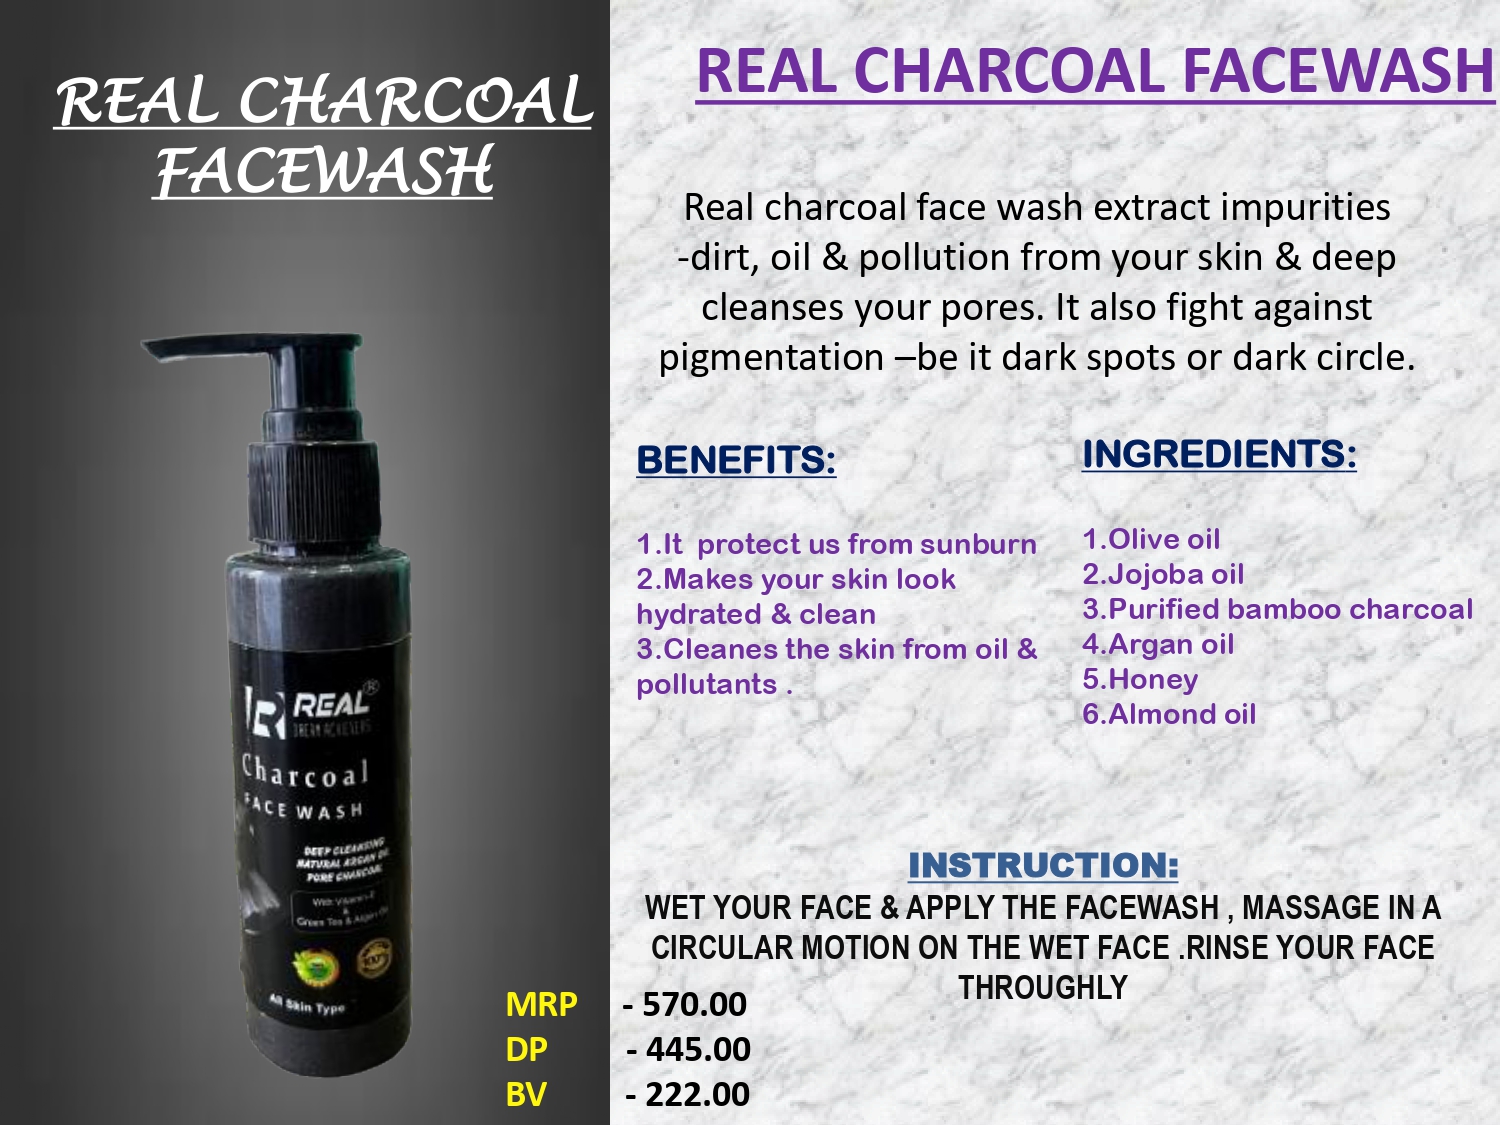 Real Charcoal Face Wash